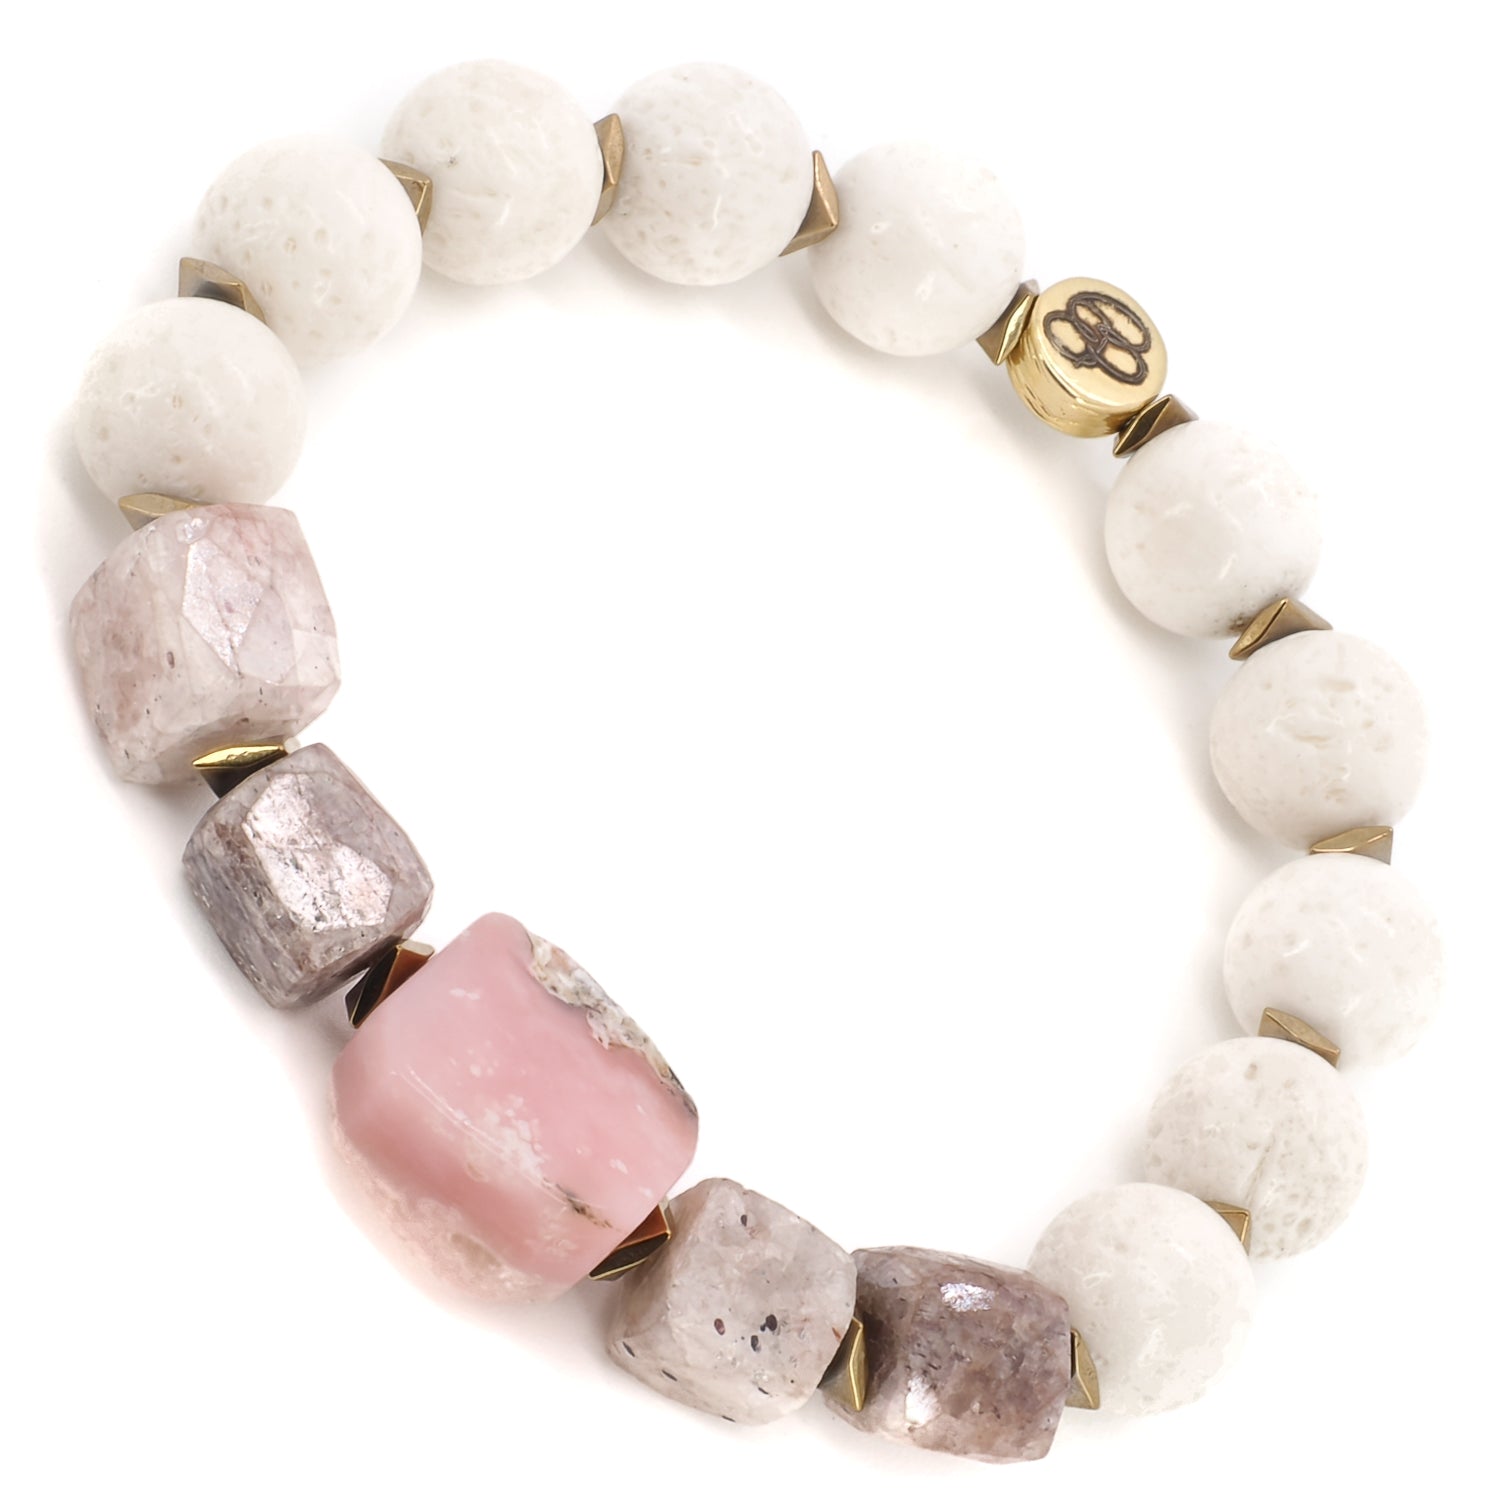 Feel grounded and balanced with the Pink Quartz Balance Bracelet, crafted with multicolor nugget hematite stone beads and rose quartz.